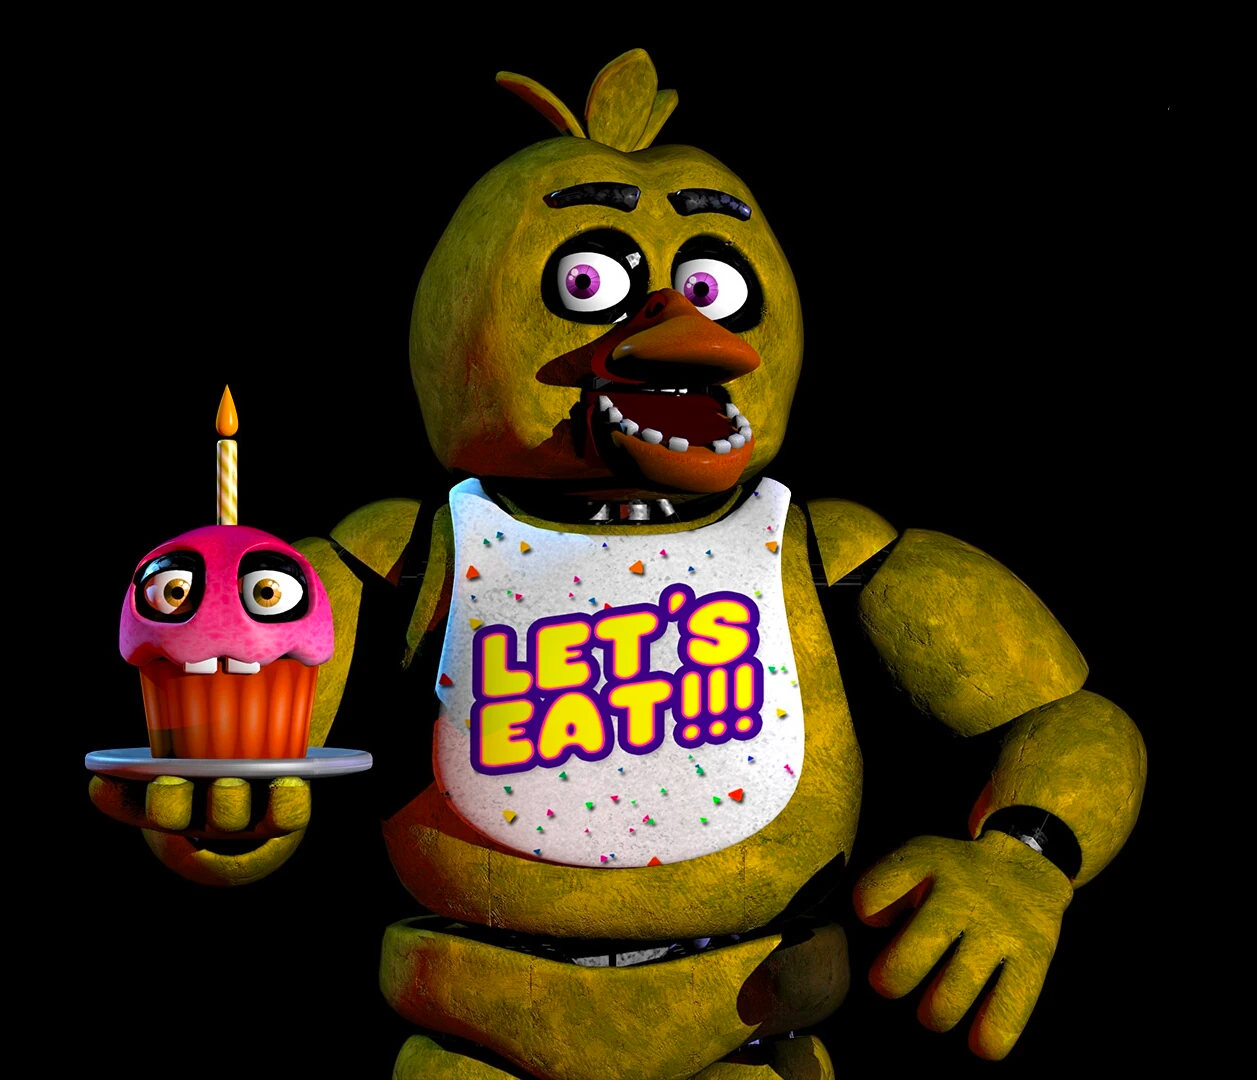 Chica is holding up a cupcake. 